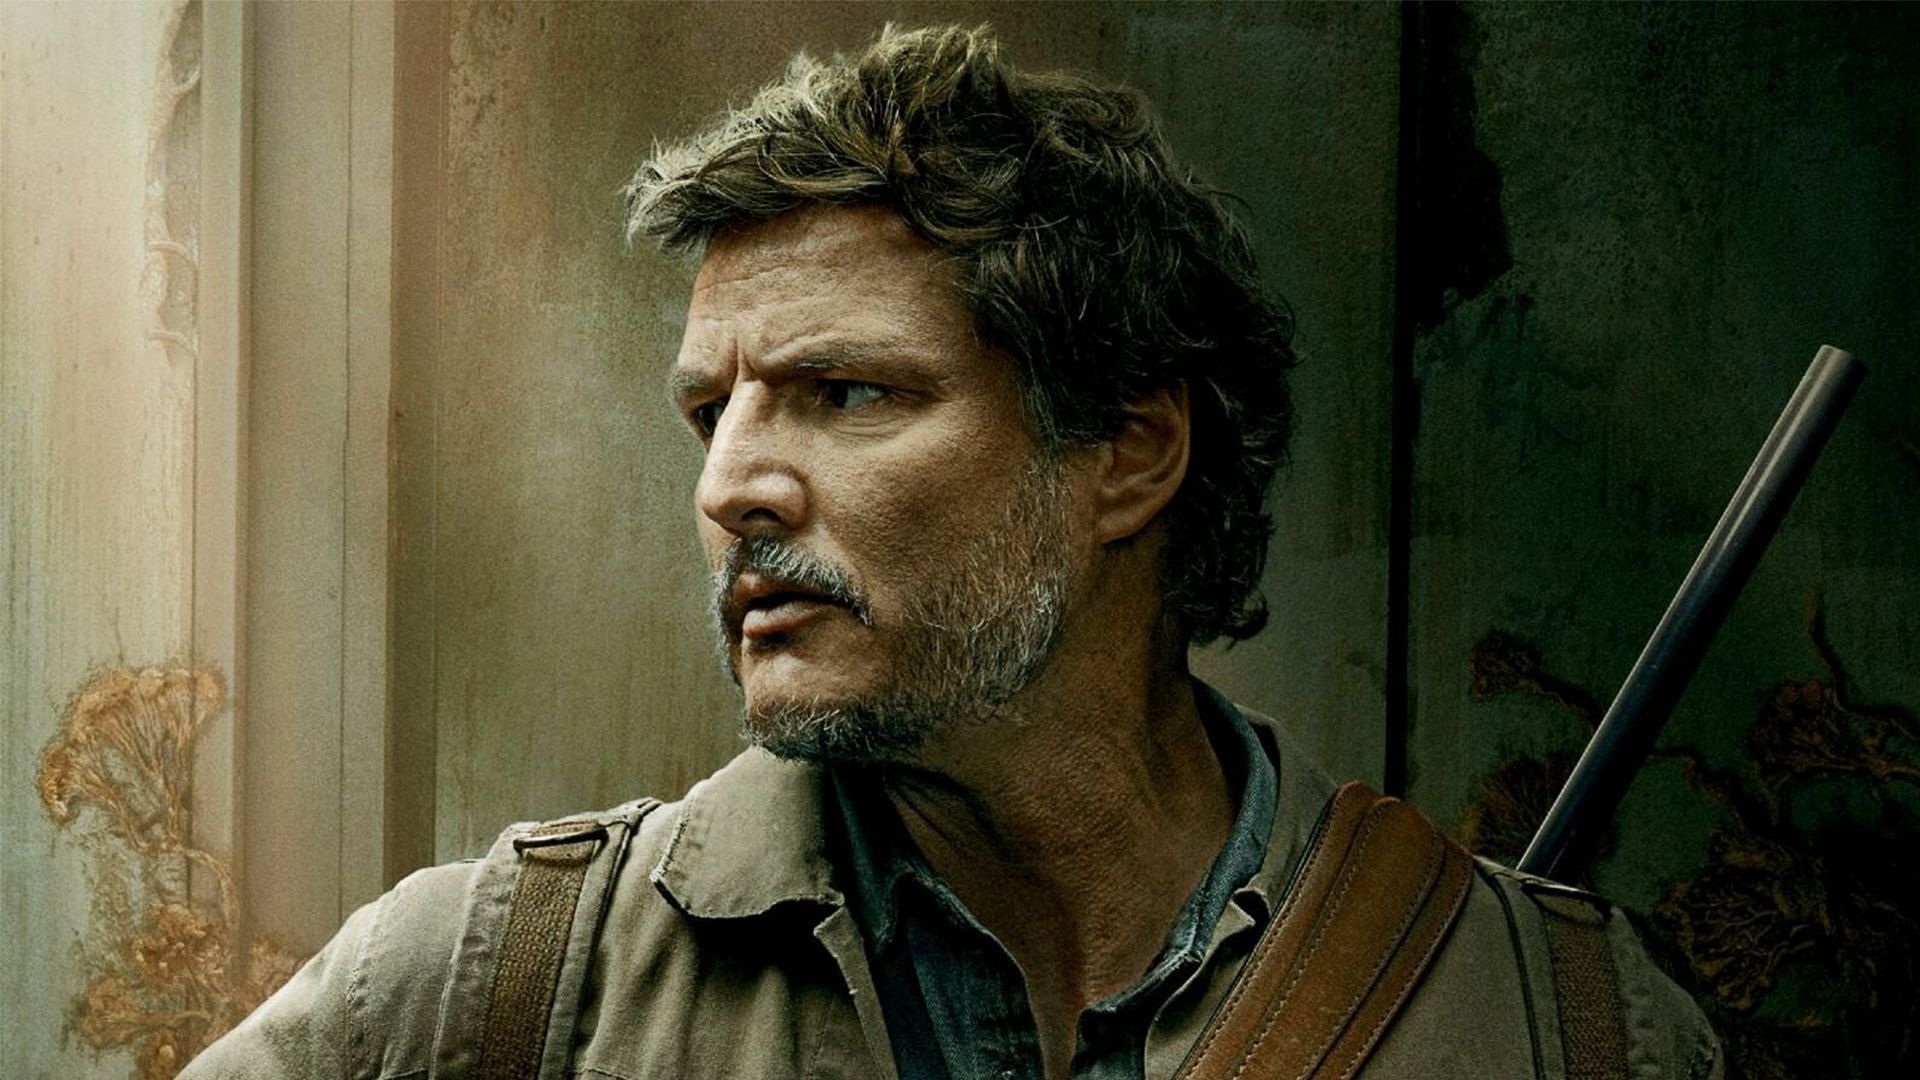 Pedro Pascal as Joel in The Last of Us 